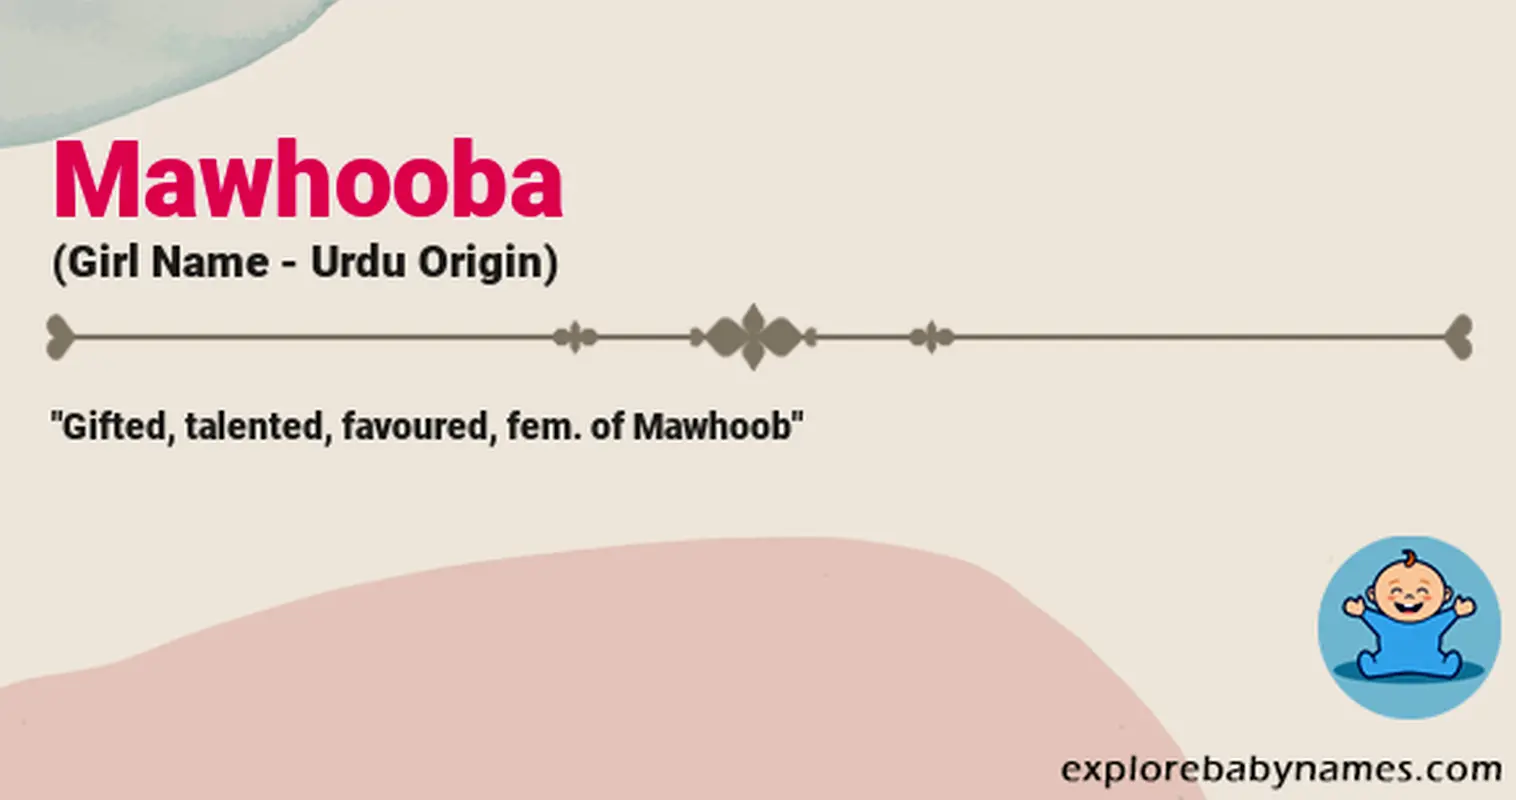 Meaning of Mawhooba